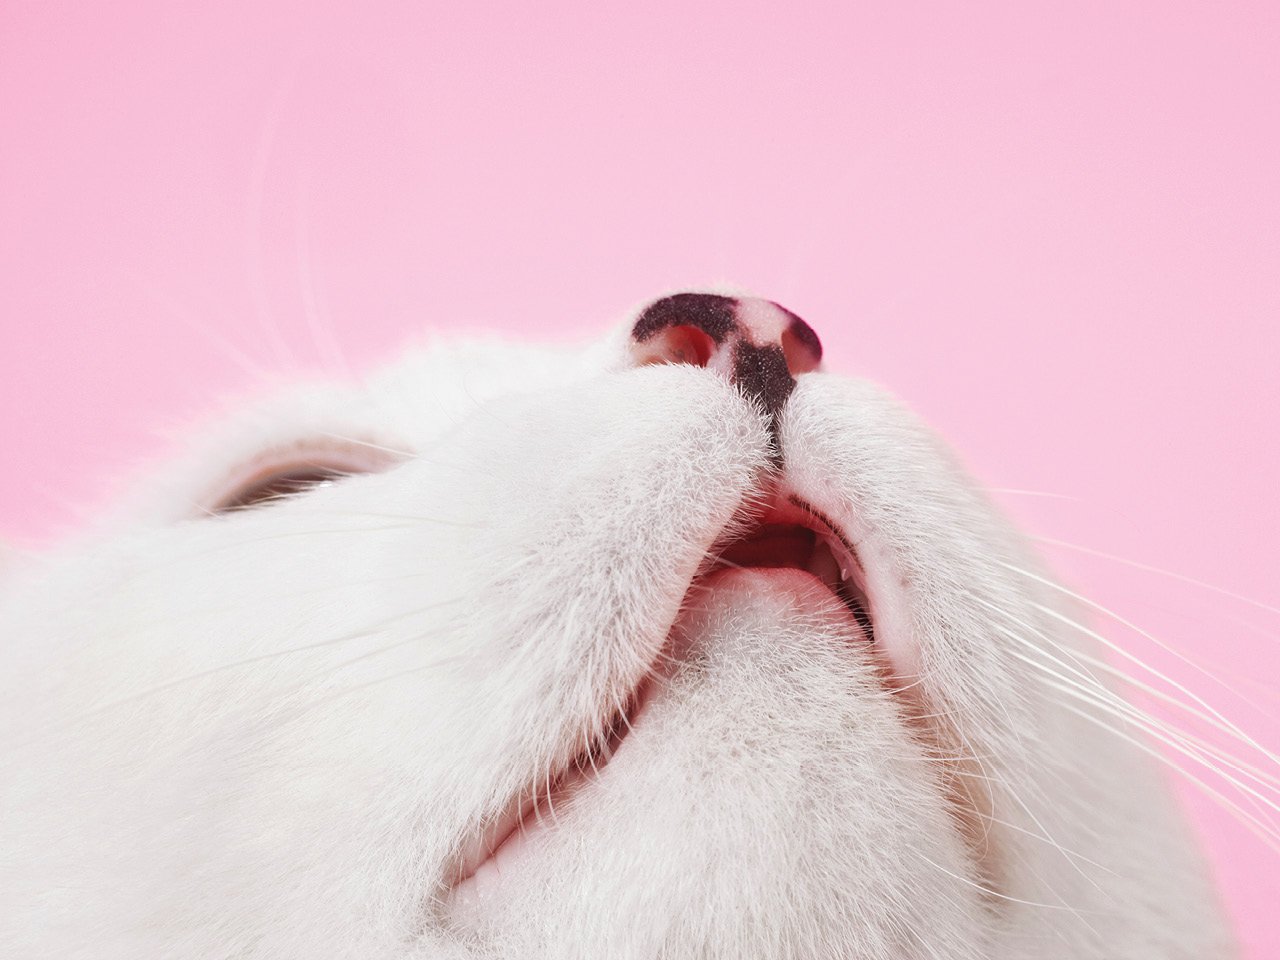 Close up on a white cat's face and nose with their eyes closed.